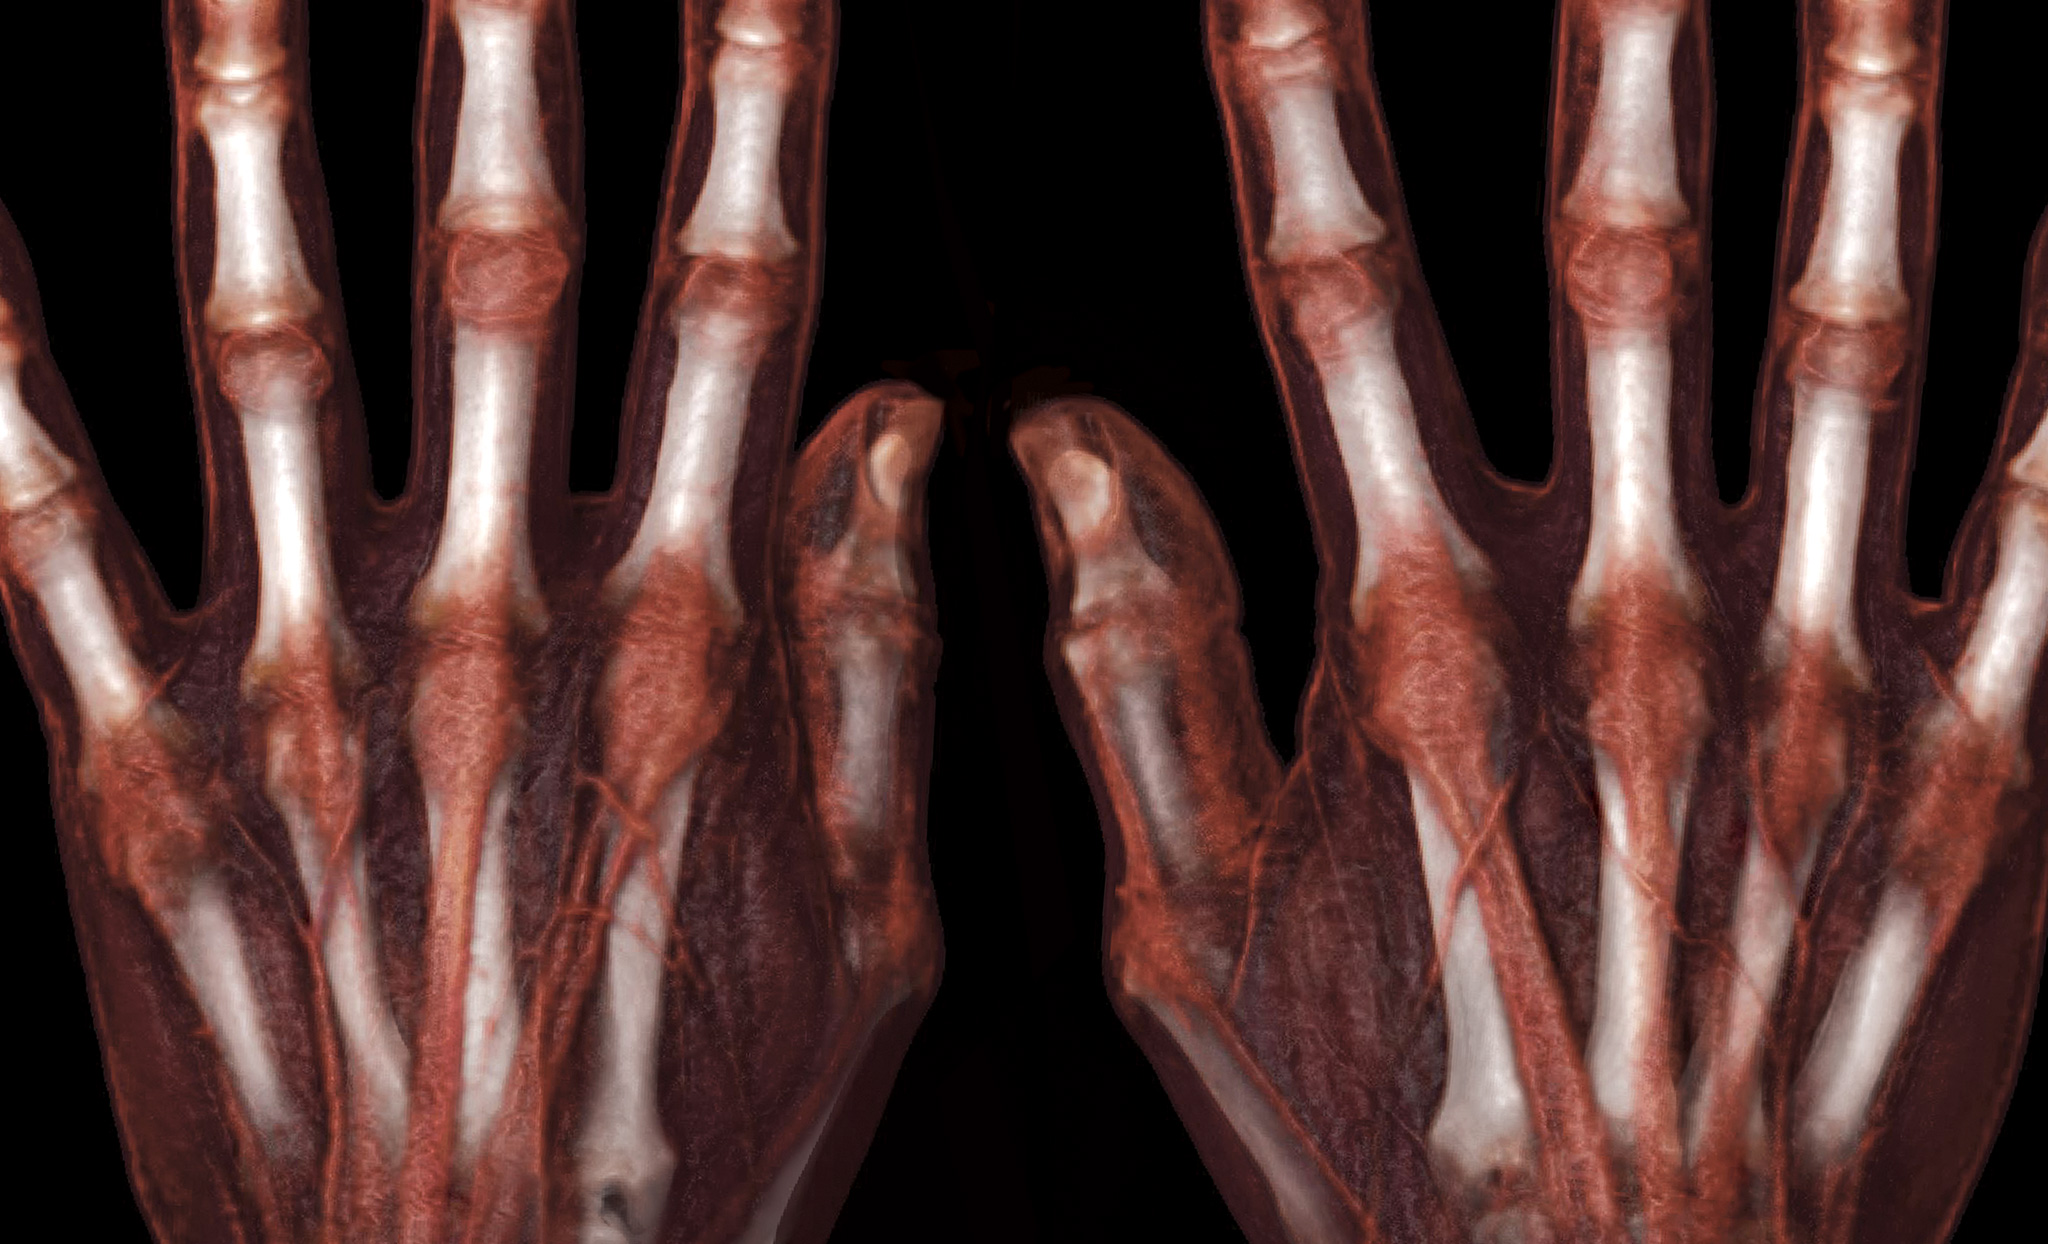 Clinical applications musculoskeletal intro banner image.